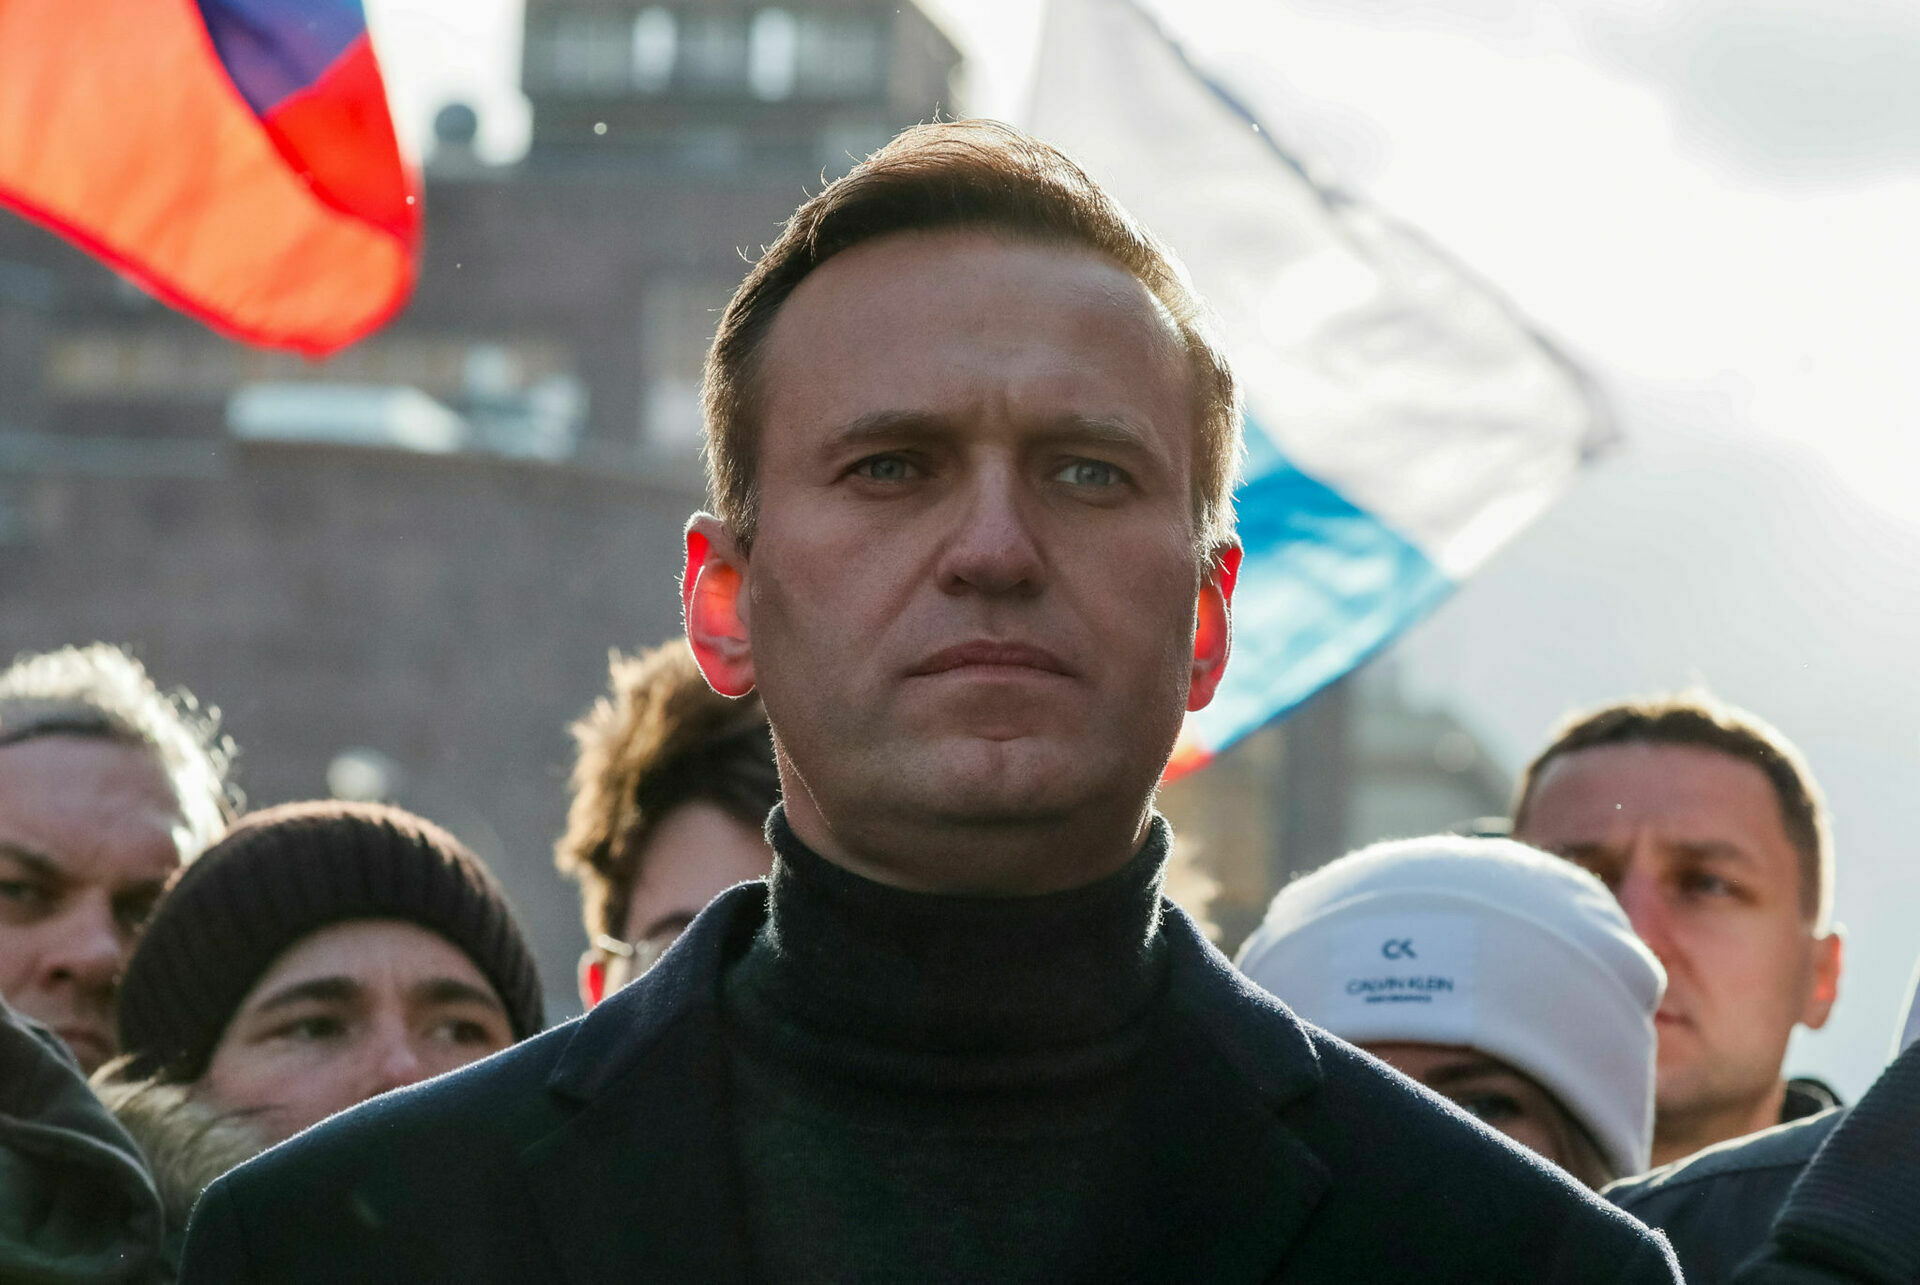 Three independent laboratories confirmed that Navalny's body contained Novichok poison